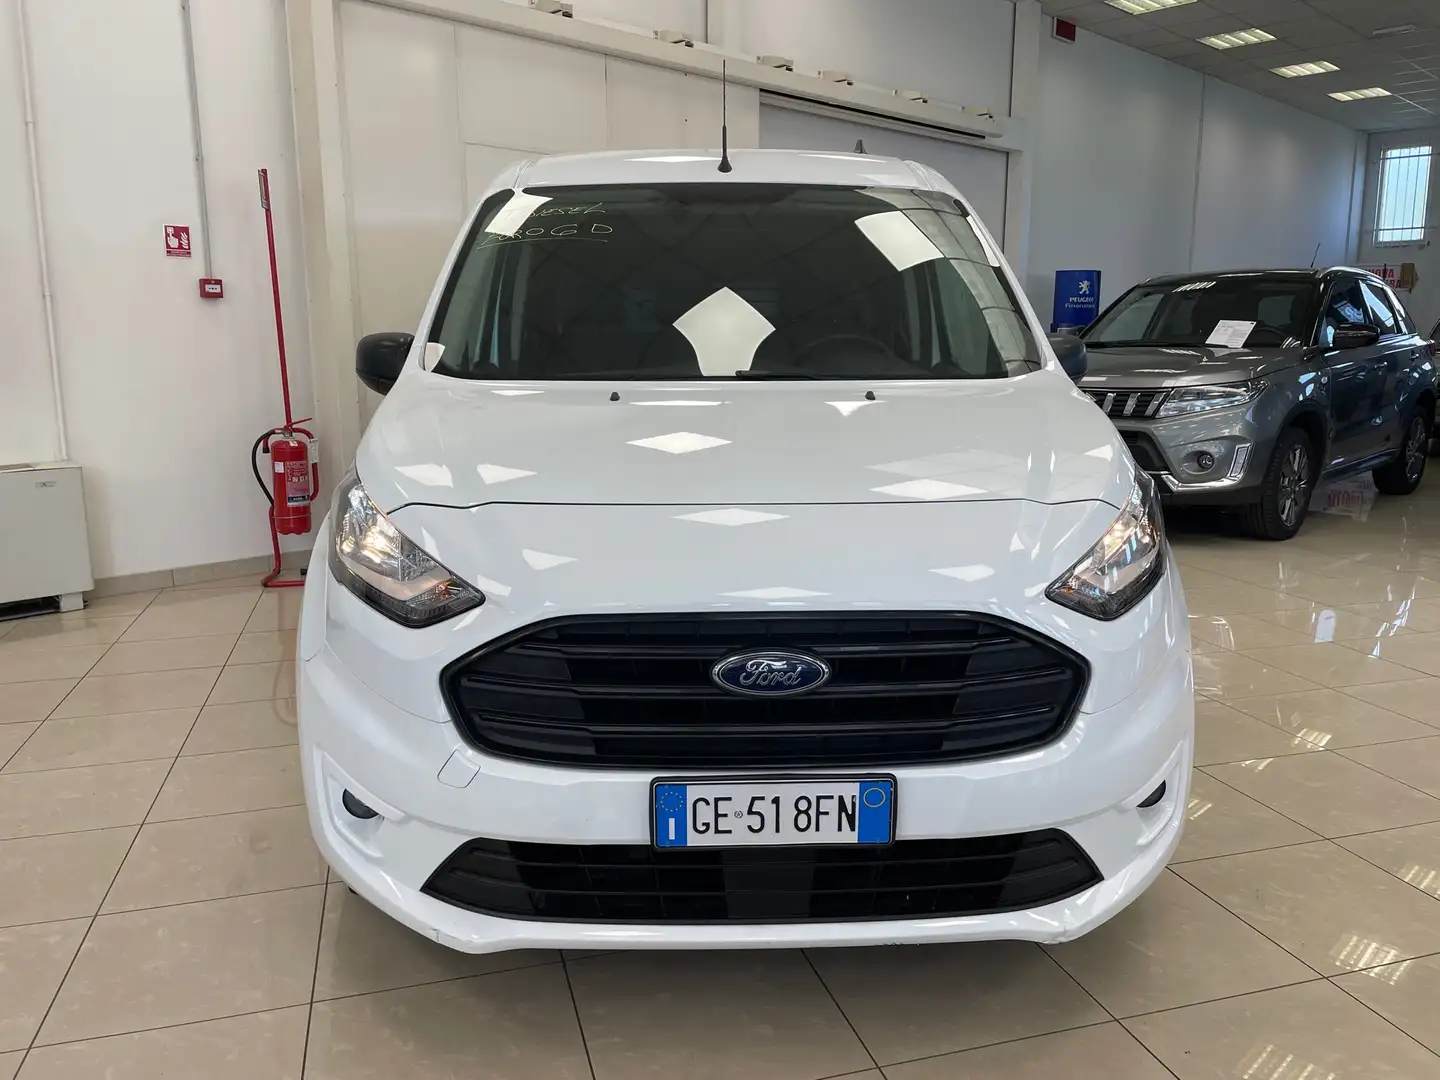 Ford Transit Connect .5 EcoBlue Kasten Trend lang CON IVA A MARGINE Bianco - 2